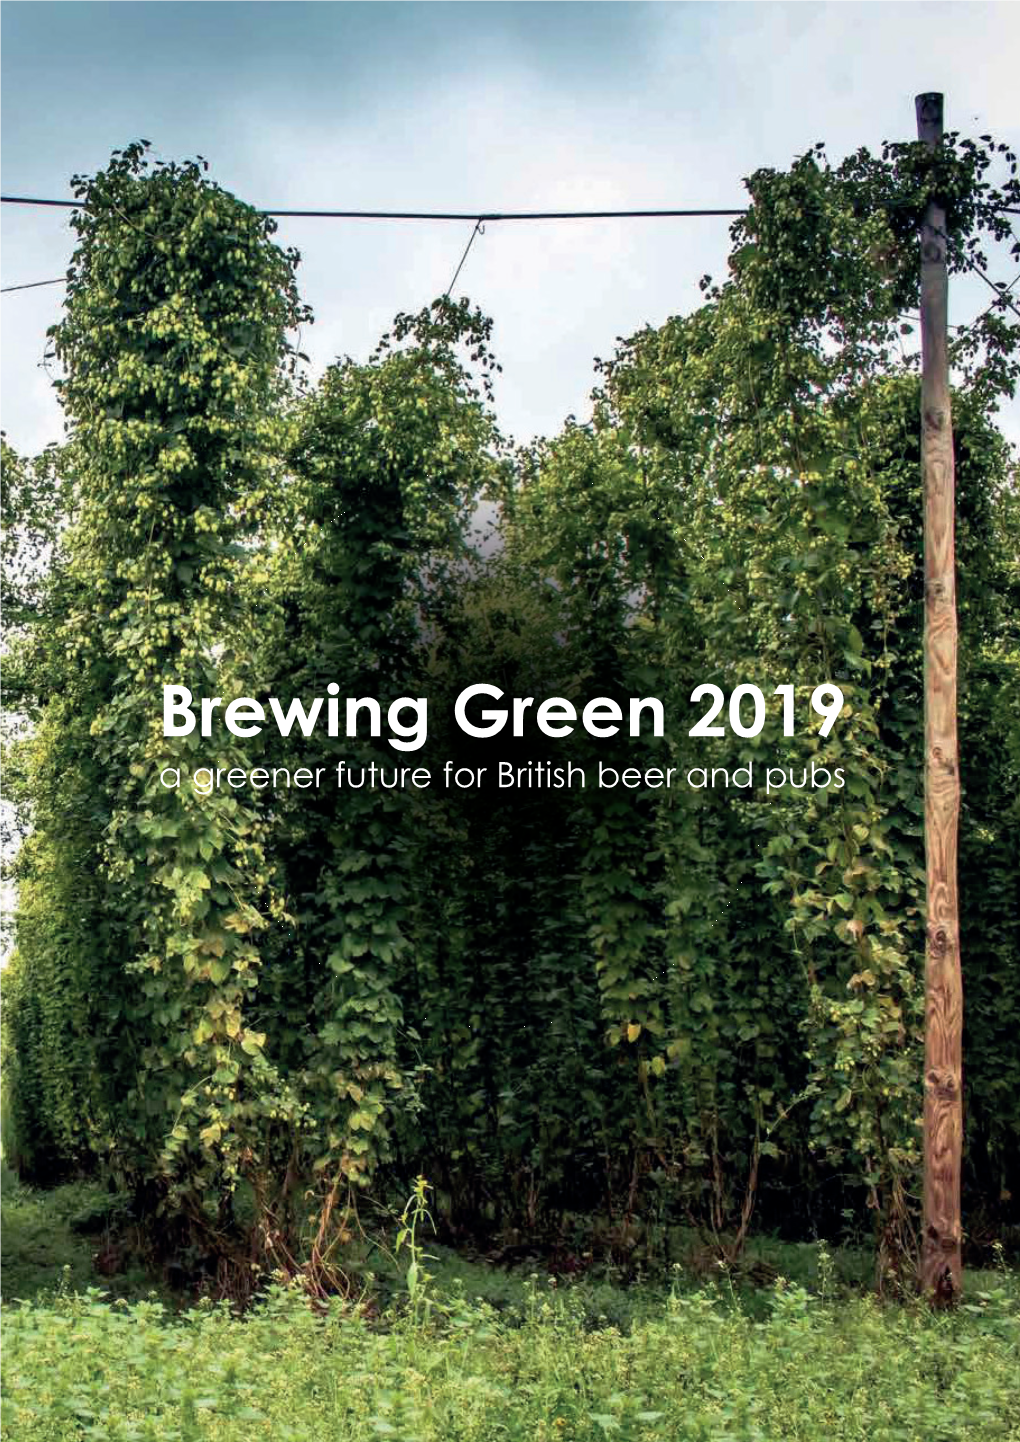 Brewing Green 2019 a Greener Future for British Beer and Pubs